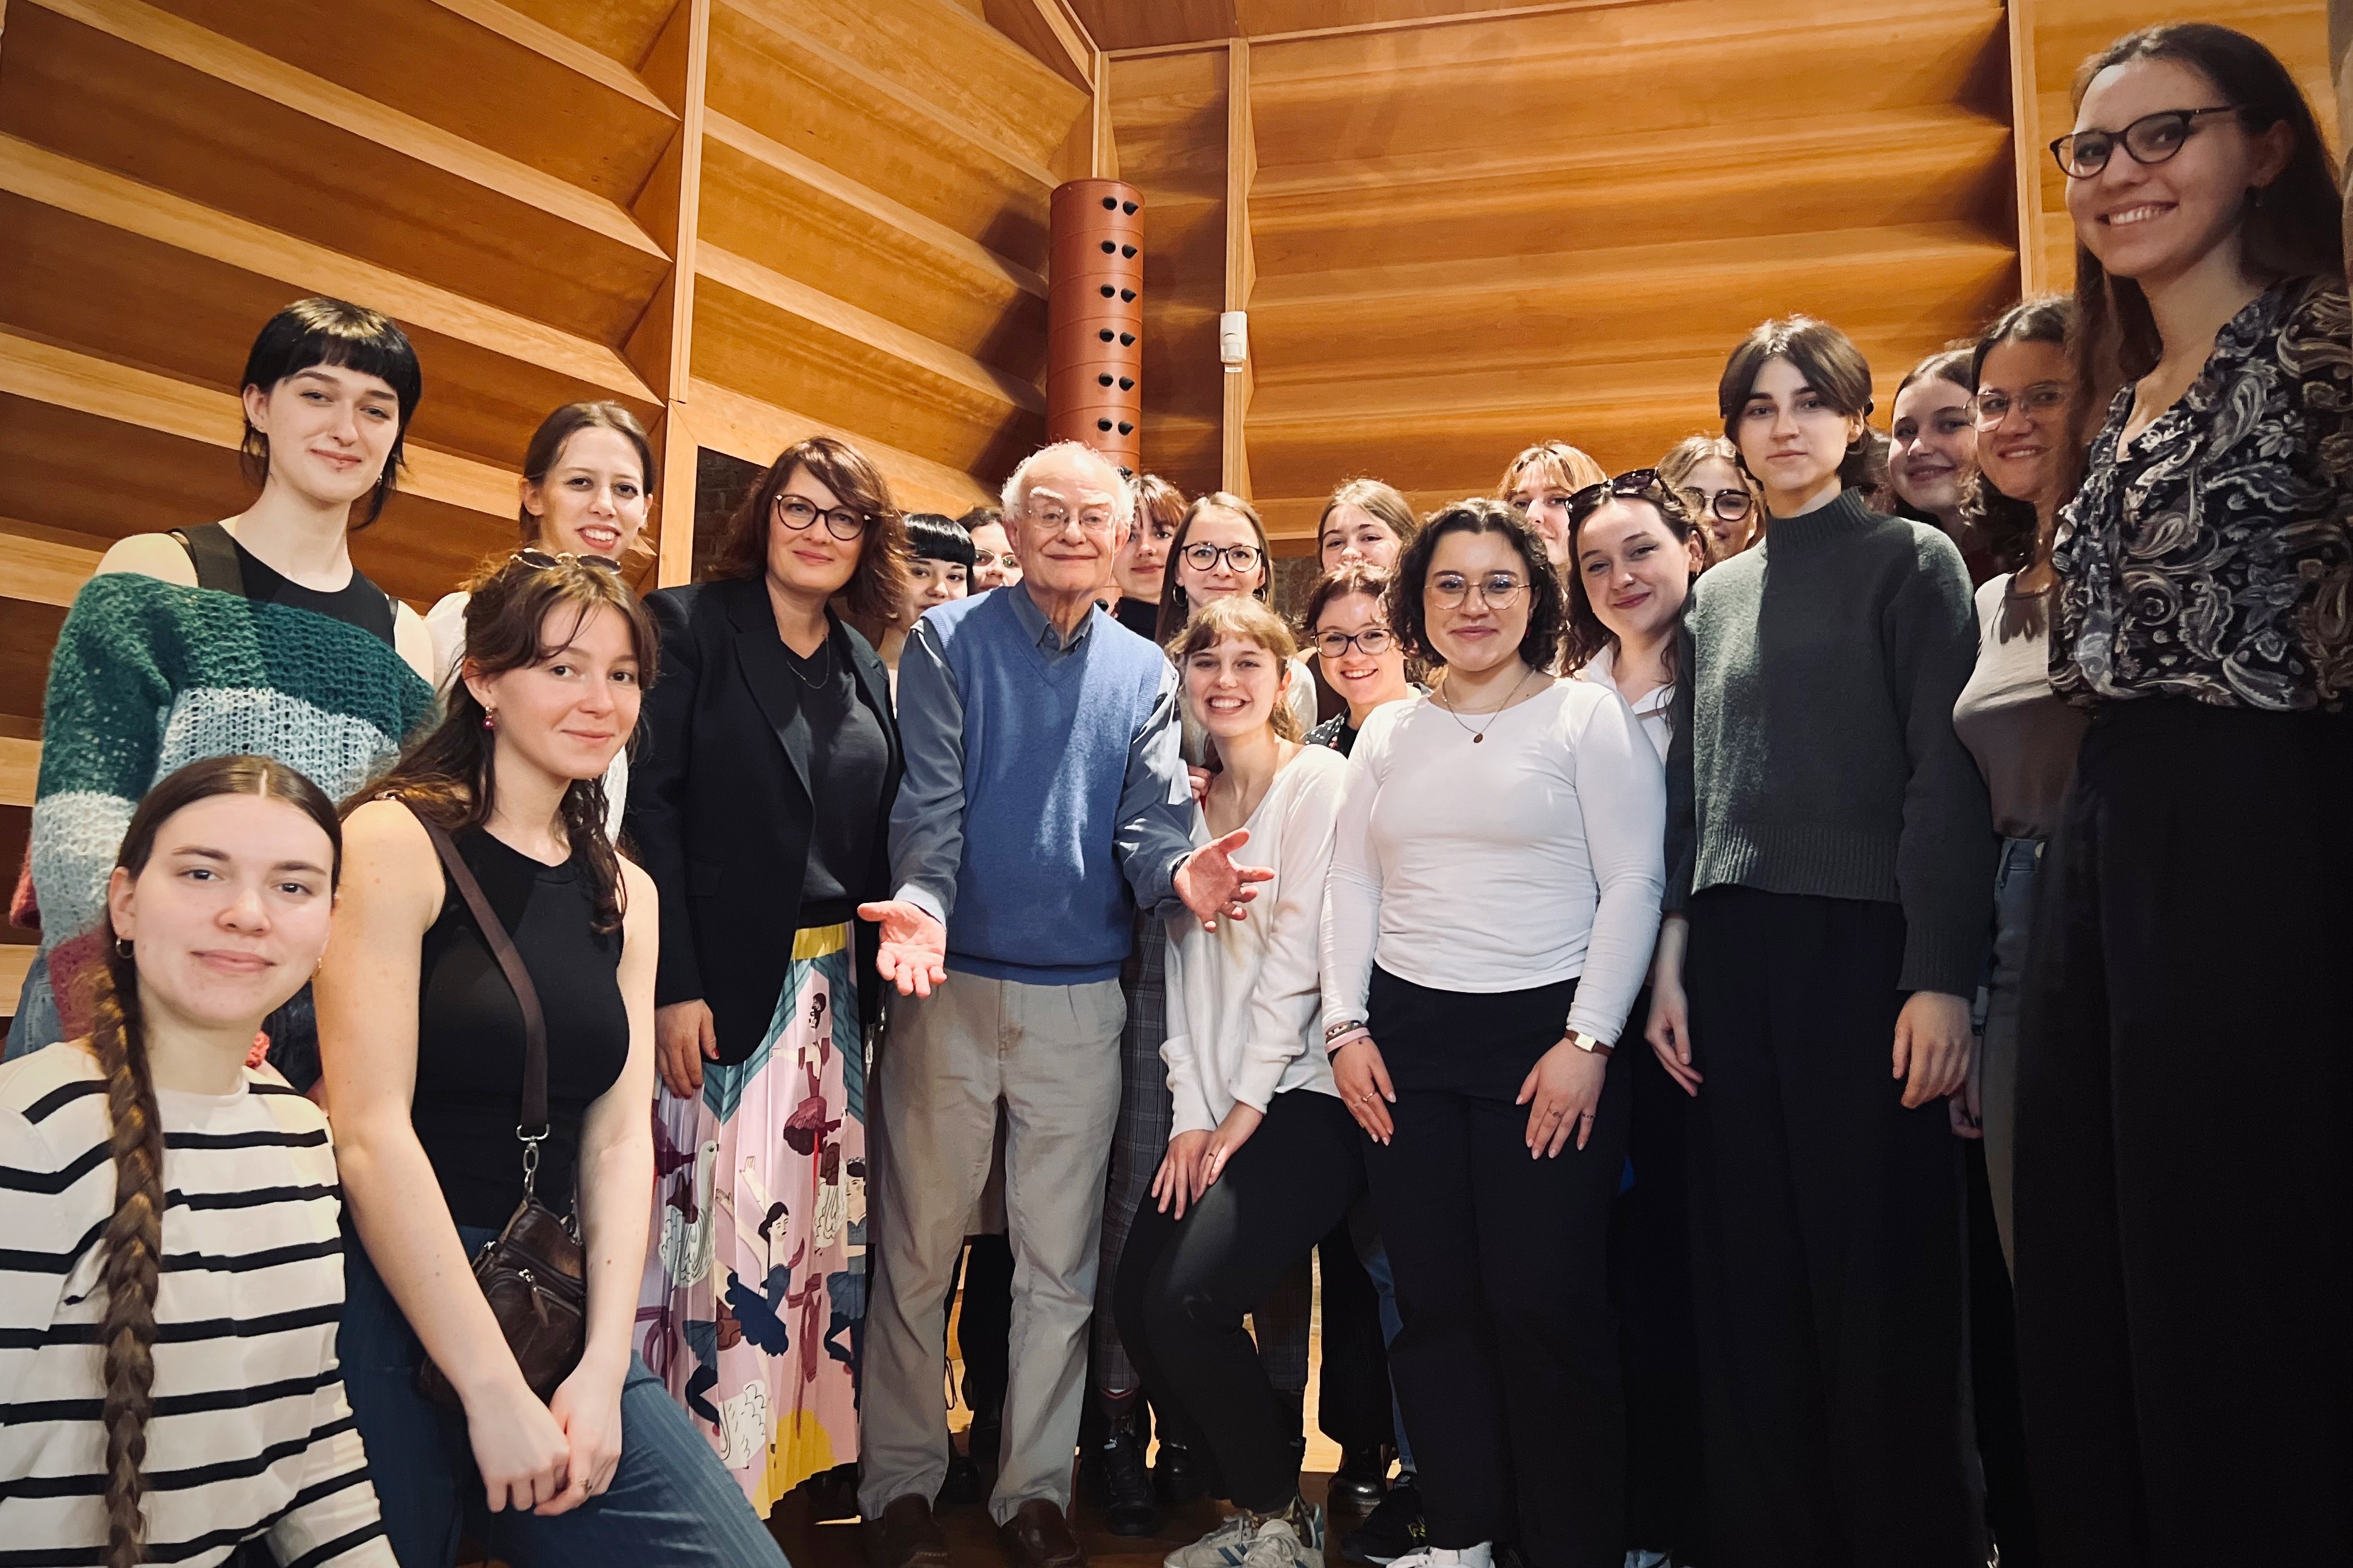 Masterclass with John Rutter in Parma (Italy)